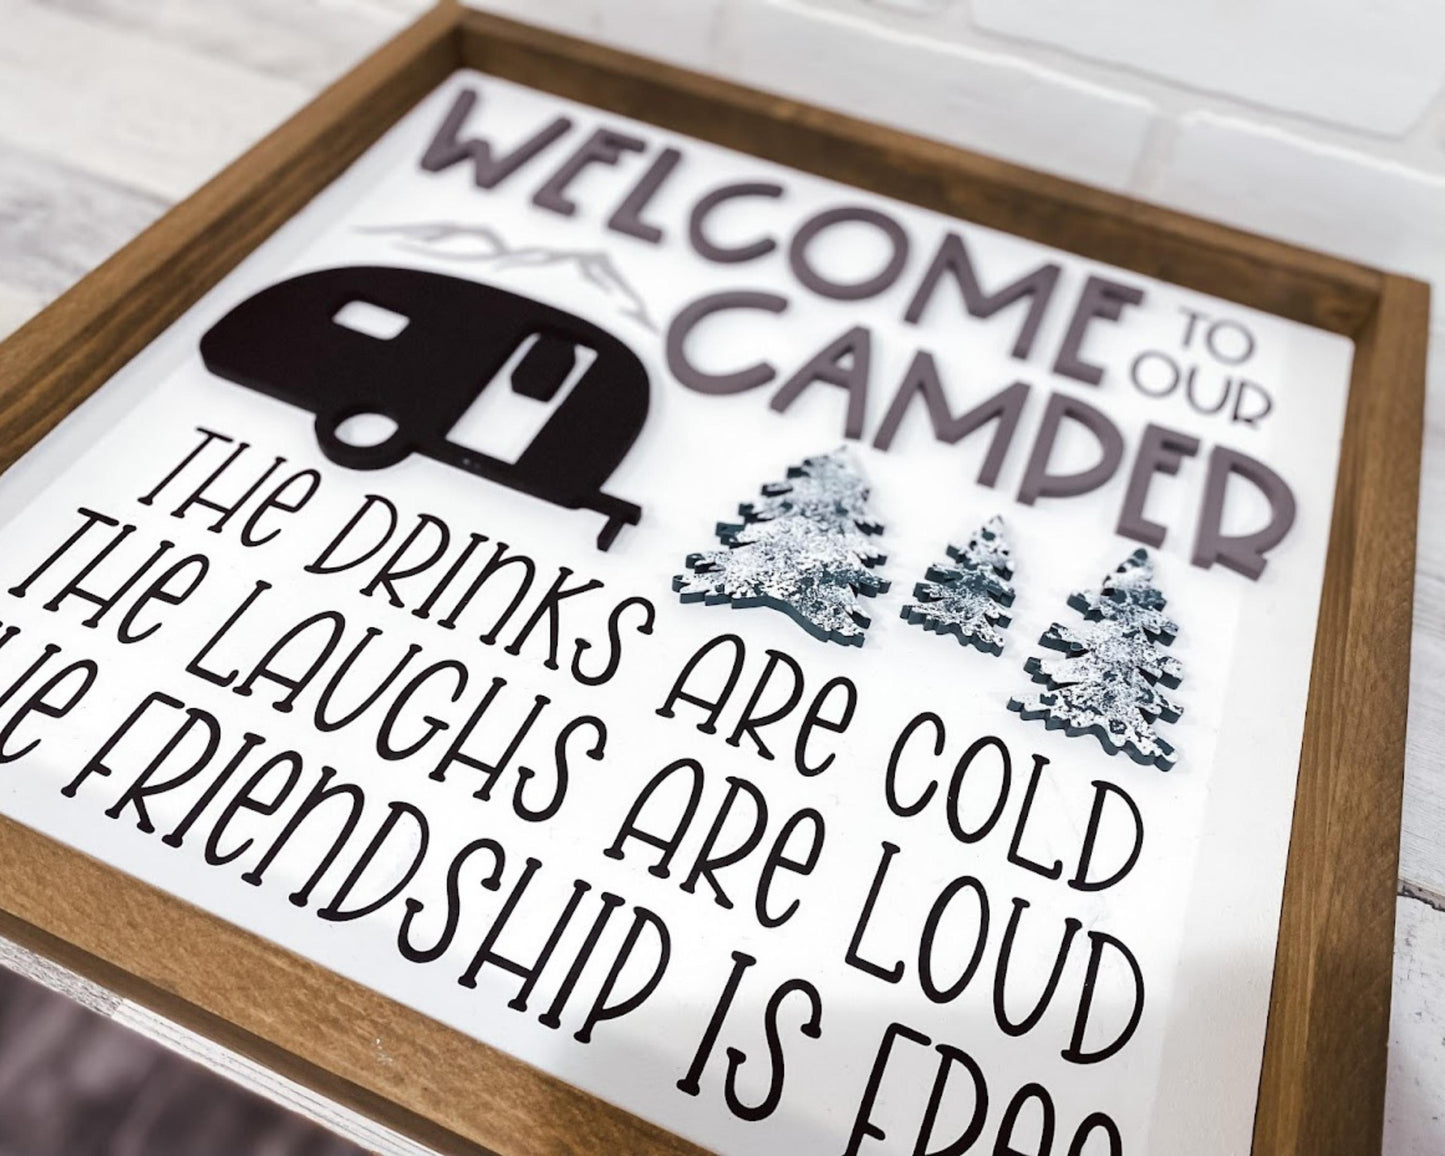 WELCOME TO OUR CAMPER - B-Cozy Home Decor